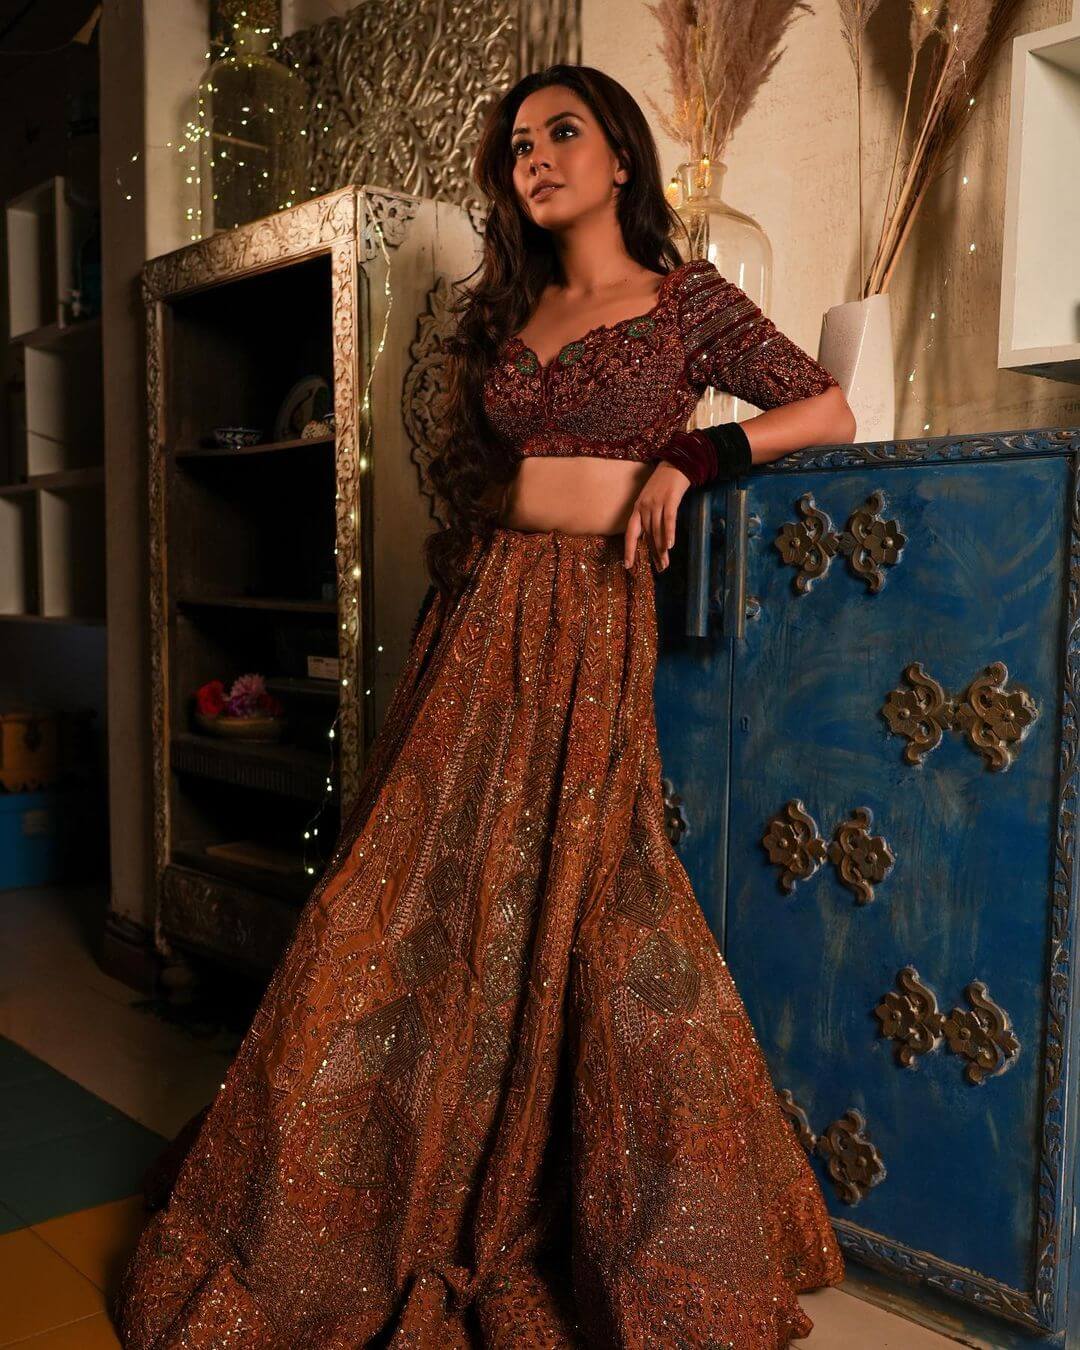 Reem Shaikh Royal Bridal Look In Heavy Embroidered Lehenga With No Makeup Look